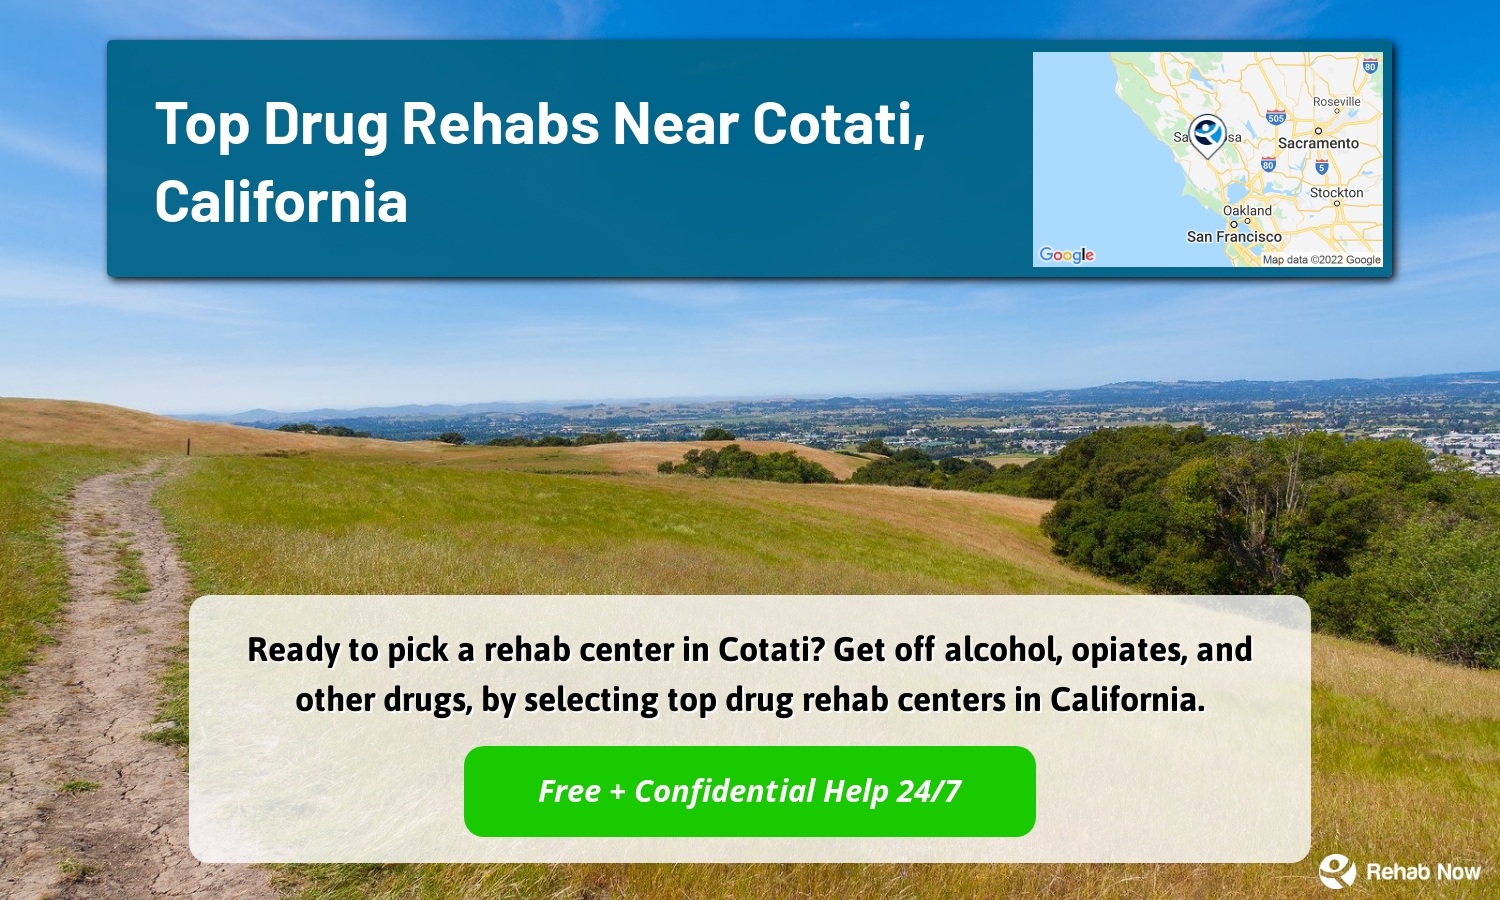 Ready to pick a rehab center in Cotati? Get off alcohol, opiates, and other drugs, by selecting top drug rehab centers in California.